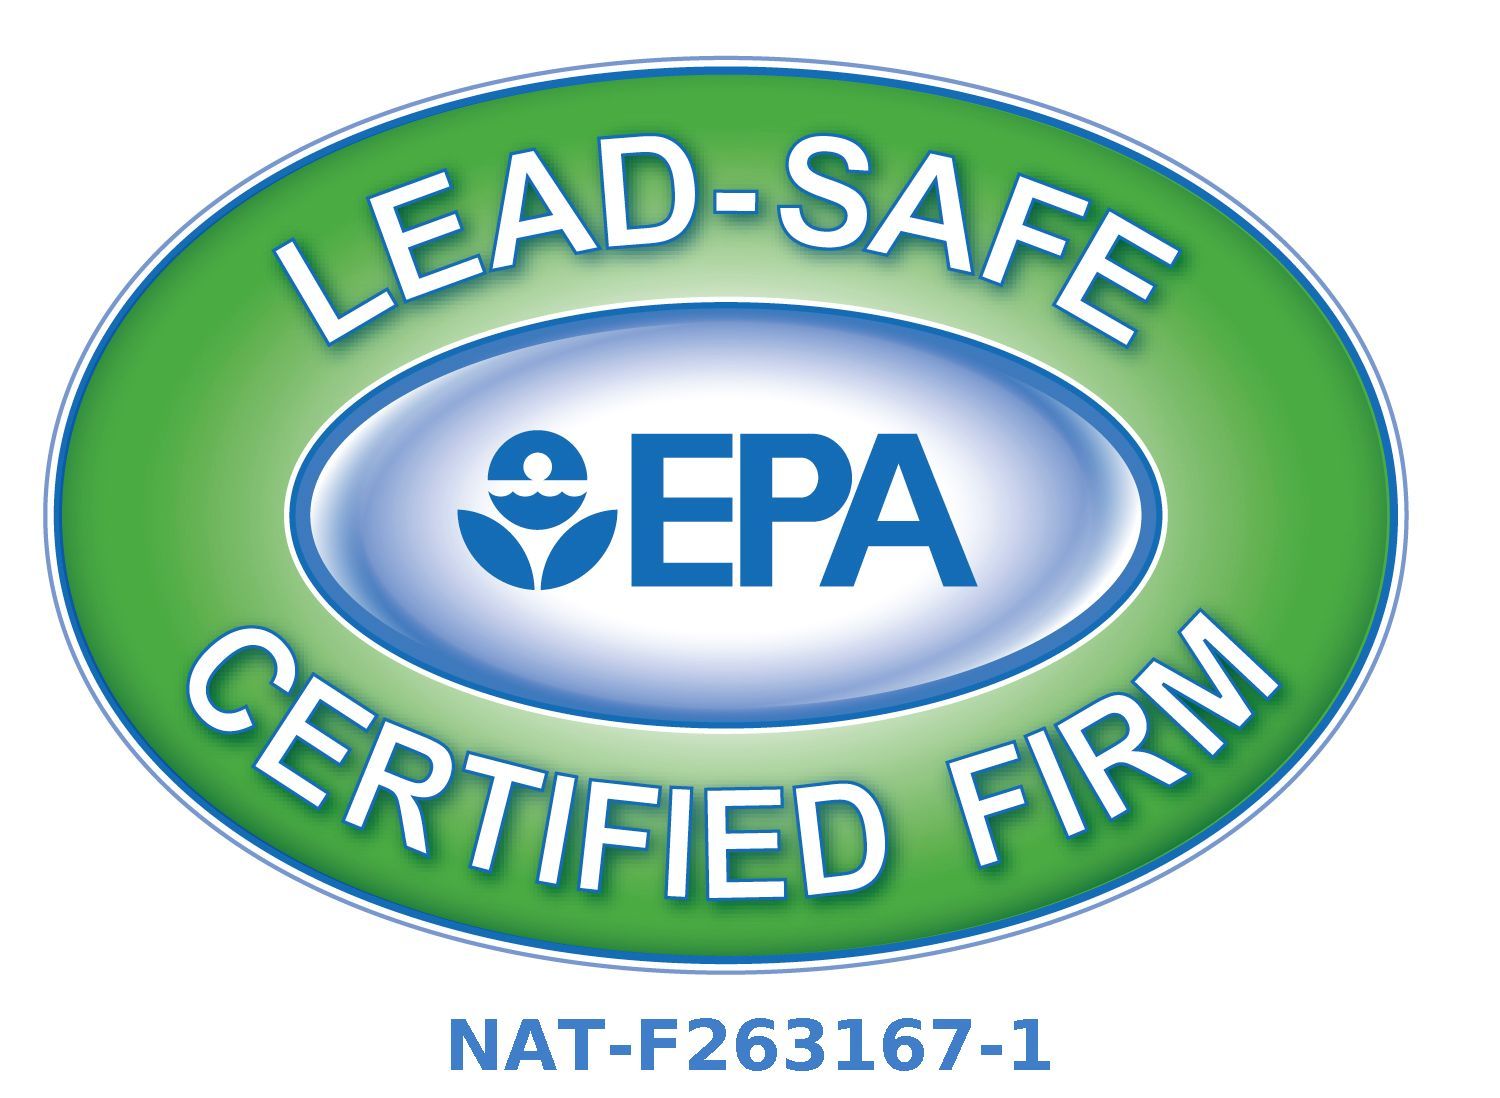 A lead safe certified firm logo that is green and blue